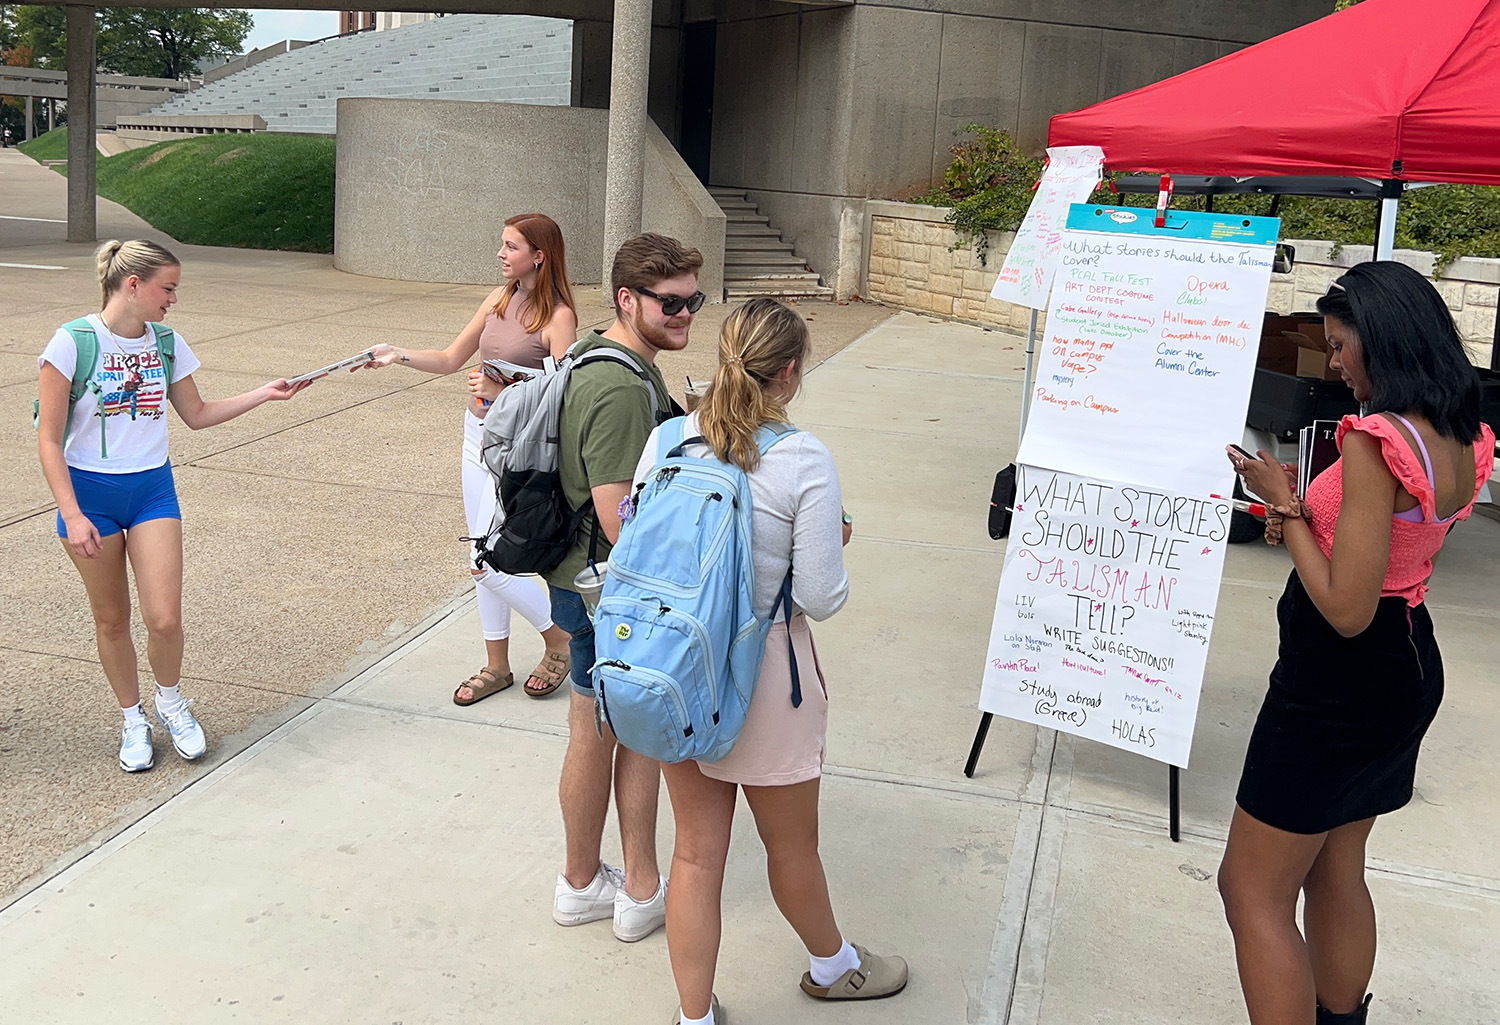 I've challenged Talisman editors to find new ways to engage their audience, including through going out on campus to solicit feedback and story ideas.